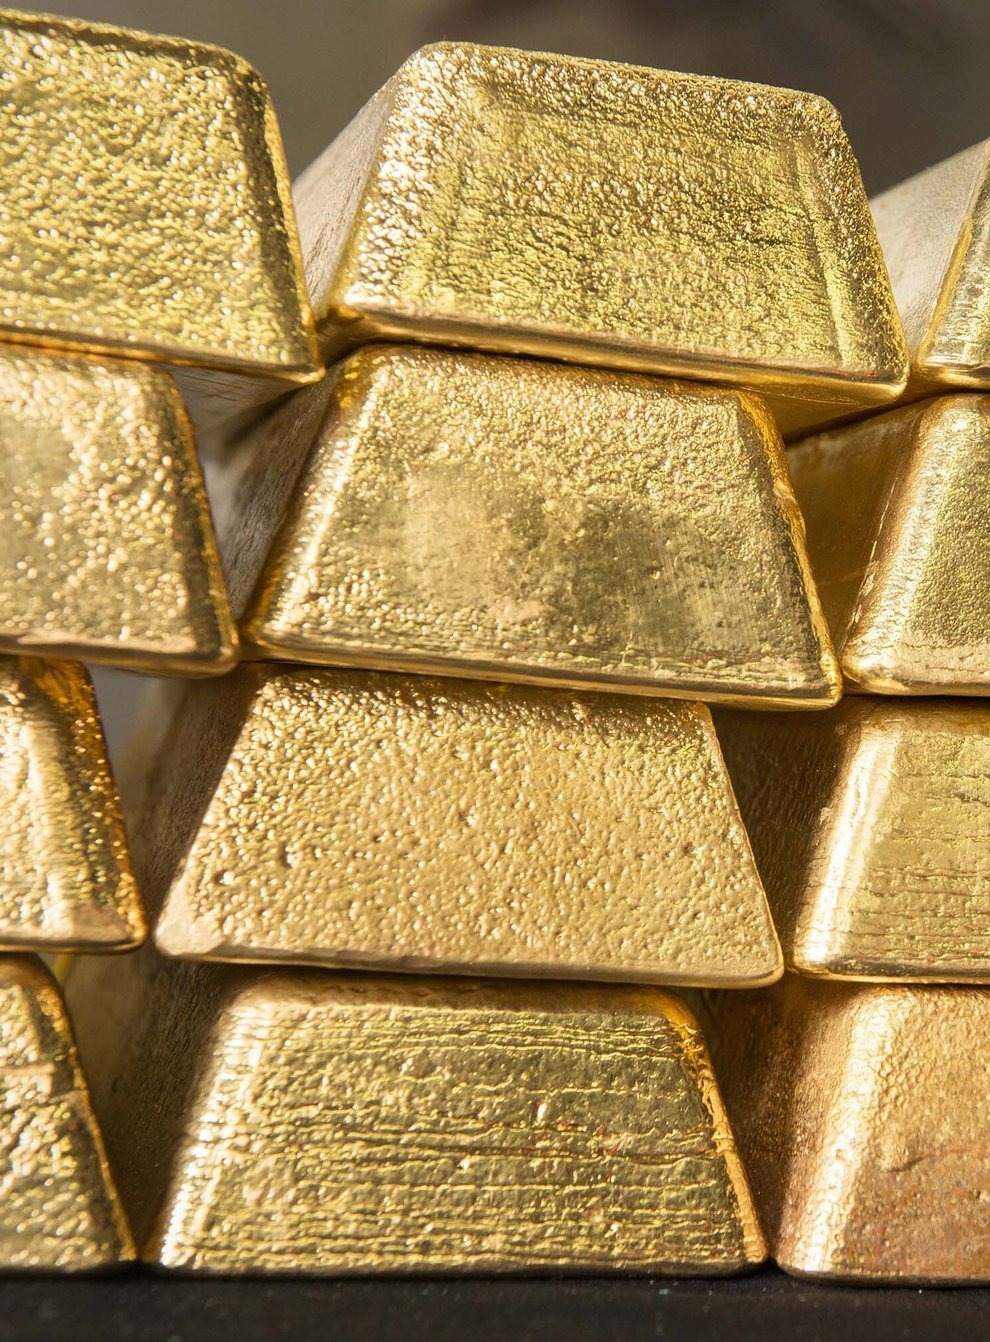 New sanctions target Russia’s use of gold in transactions (Royal Mint/PA)